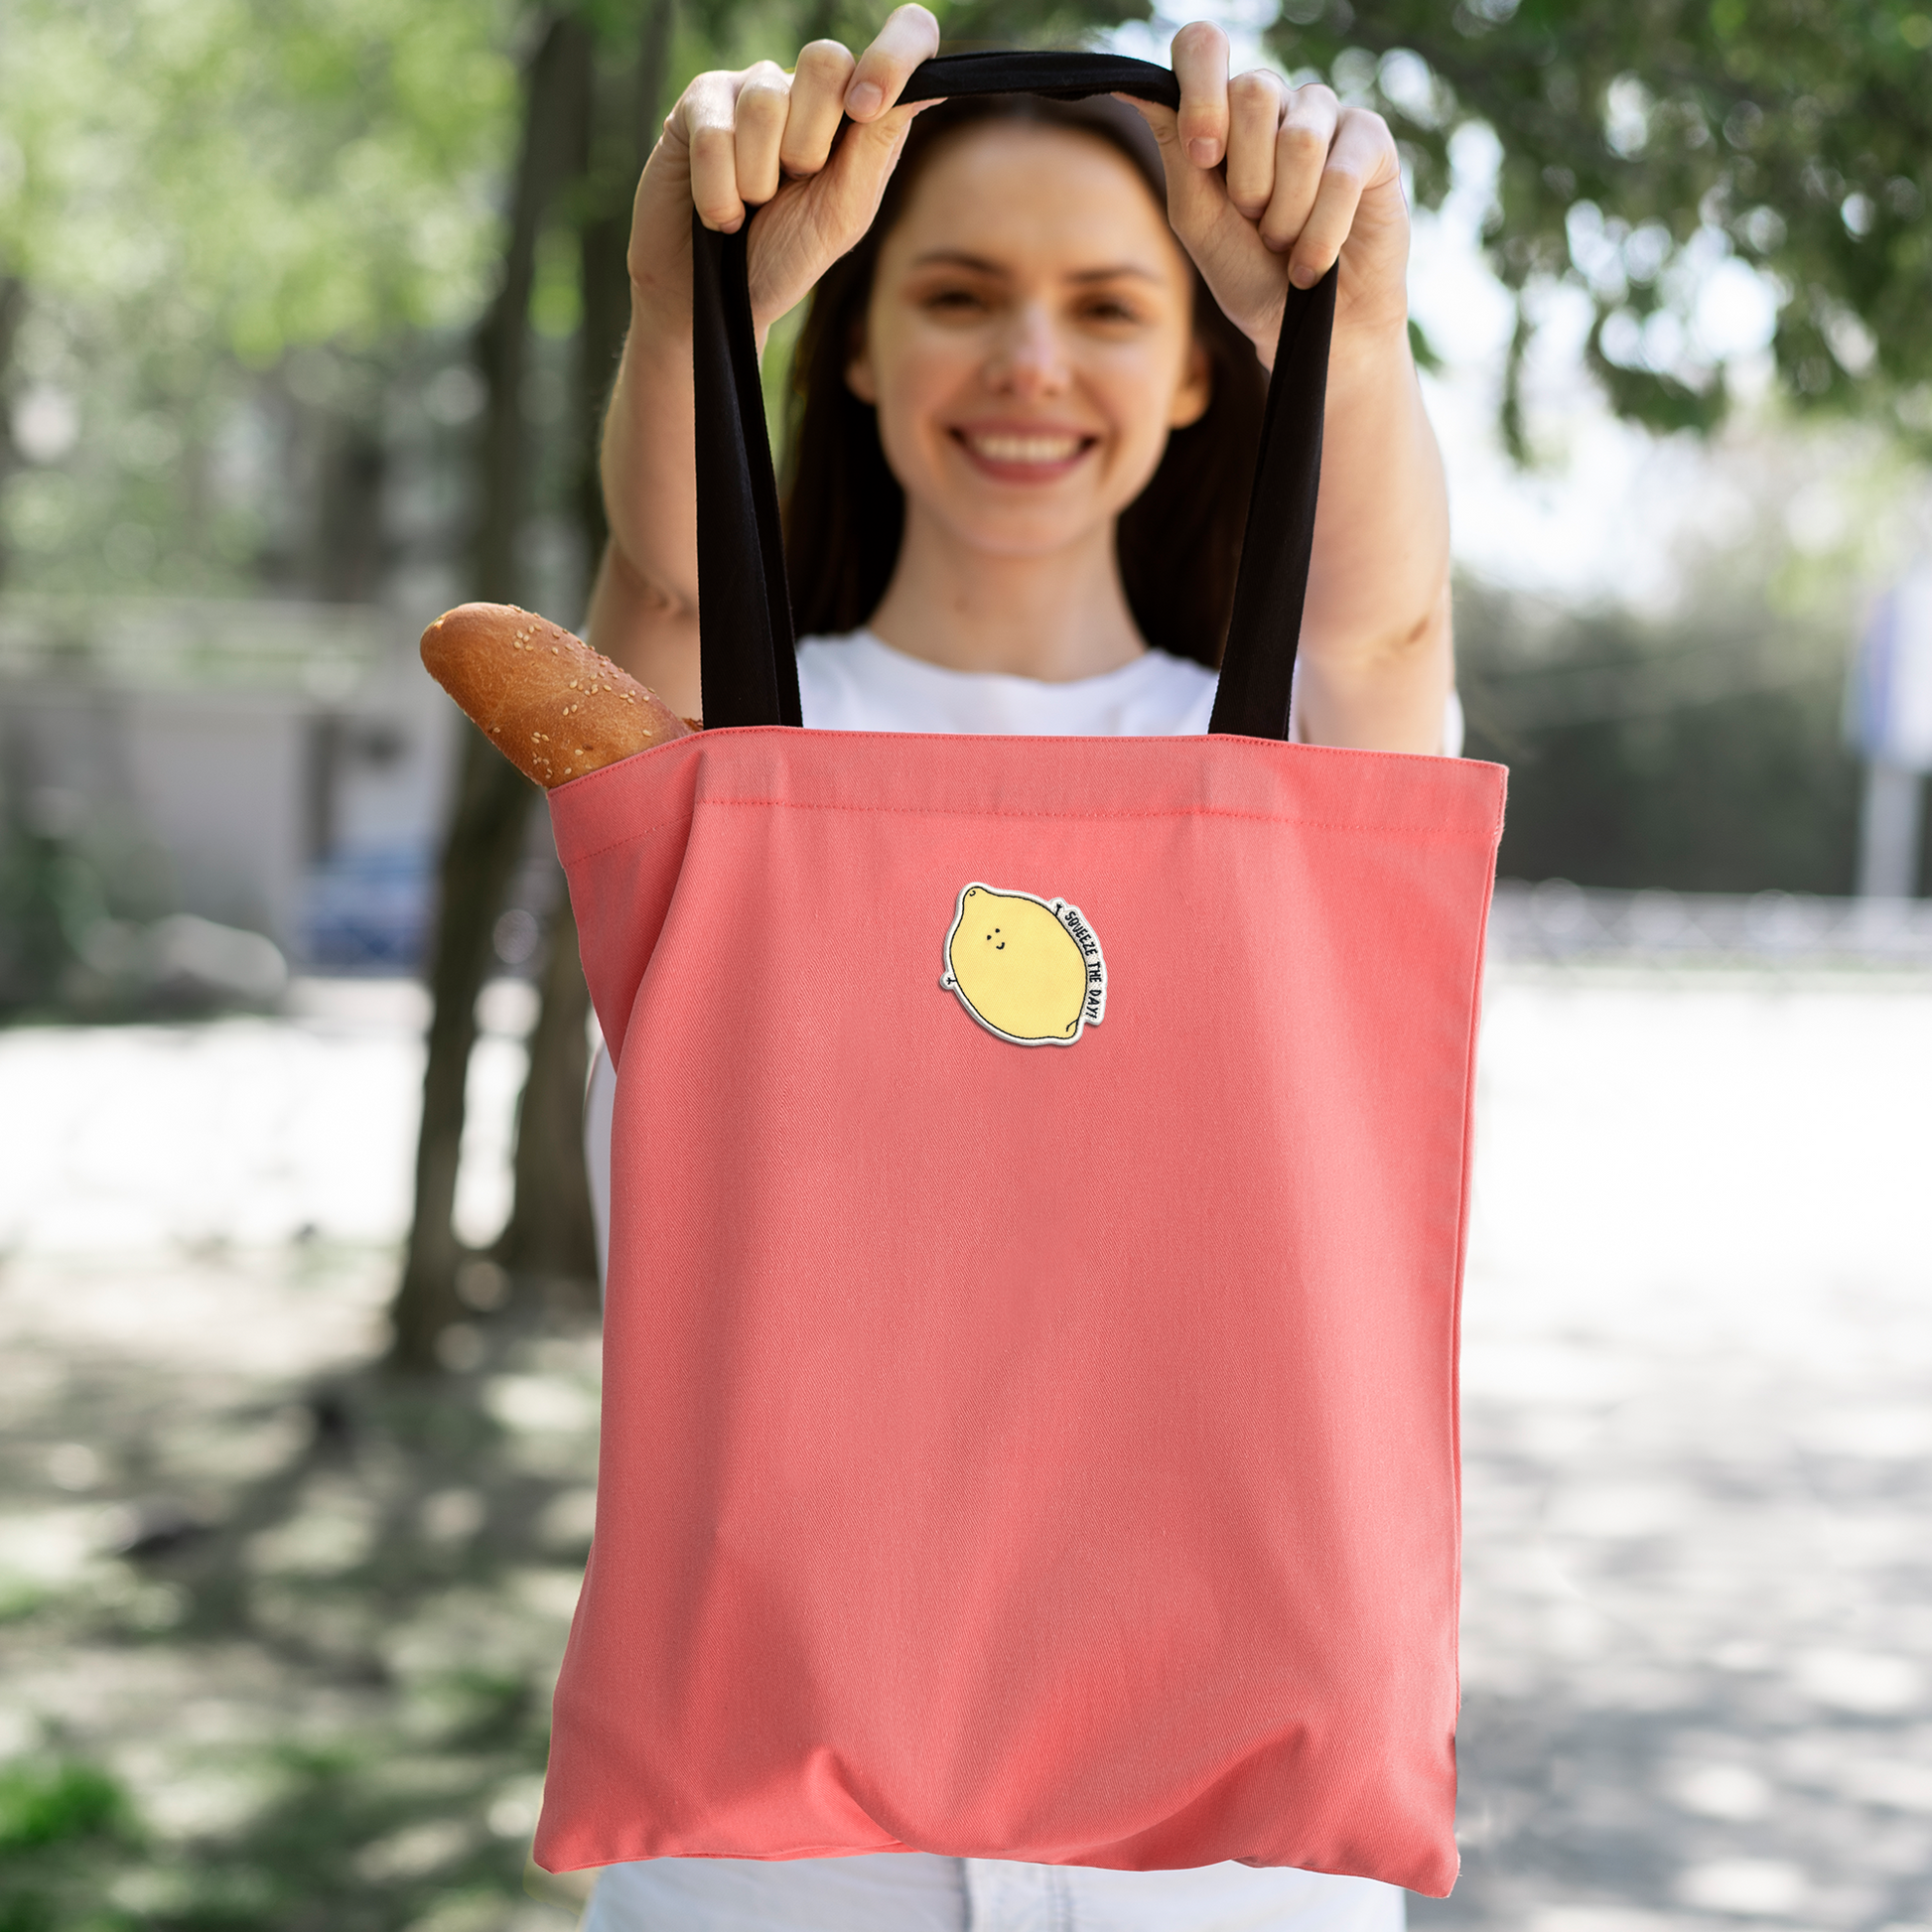 A woman holding a pink tote bag with a Squeeze The Day Patch by rockdoodles on it while following iron-on instructions using a household iron.